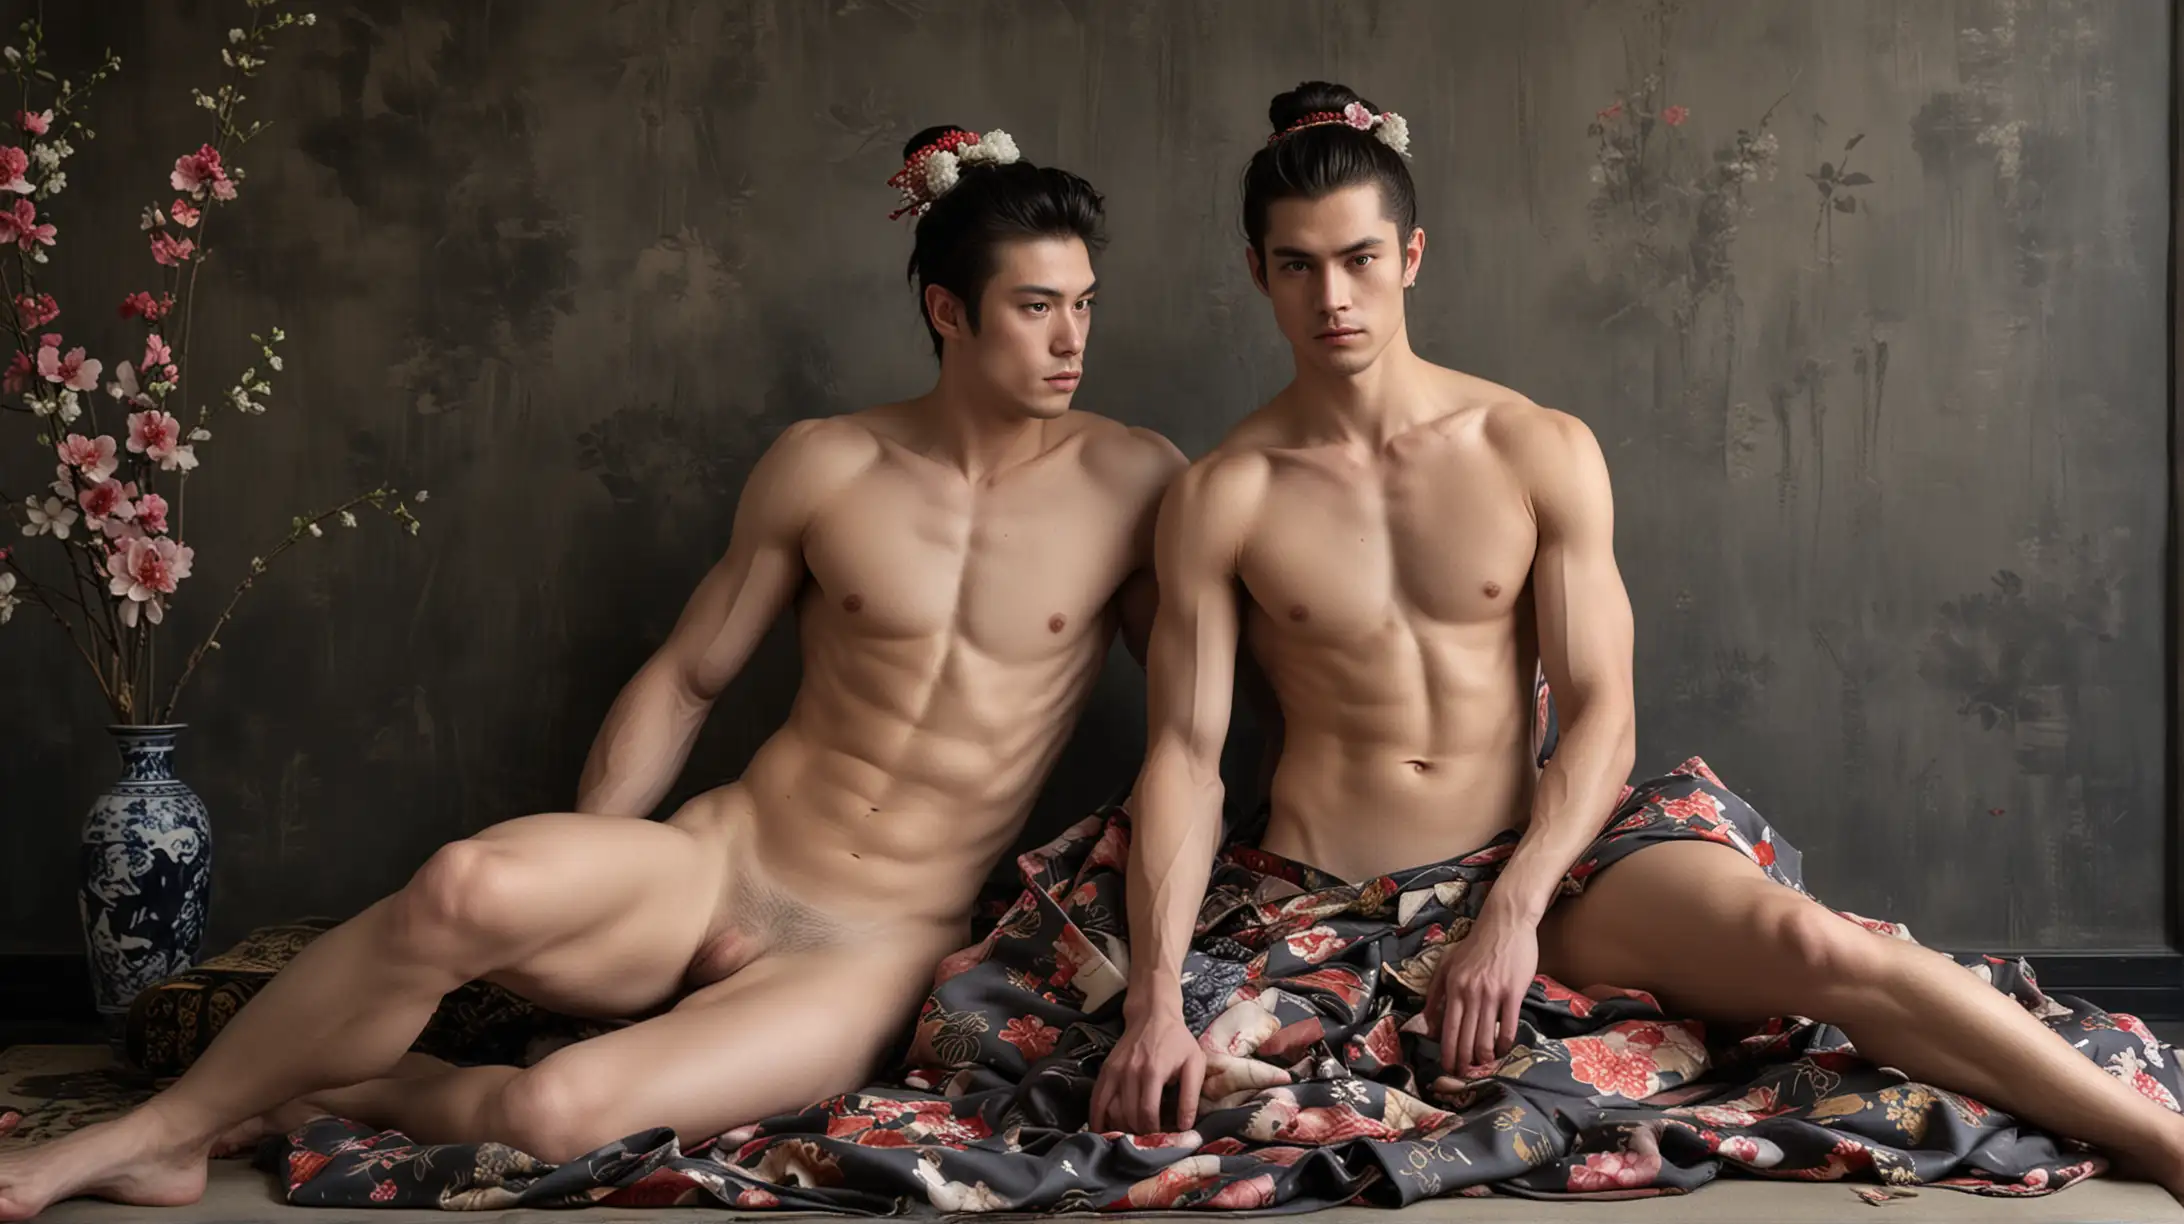 two naked attractive very european physically fit 2 young men sitting on a bed with some flowers, in the style of geisha portraiture, full naked body from slight distance, soft colors with some dark gray, backdrop wall with oriental art, narrative photography, ornate kimono lying on the floor, visible abs and hairy muscled chests of both european handsome models, realist fine details, naked lying over each other